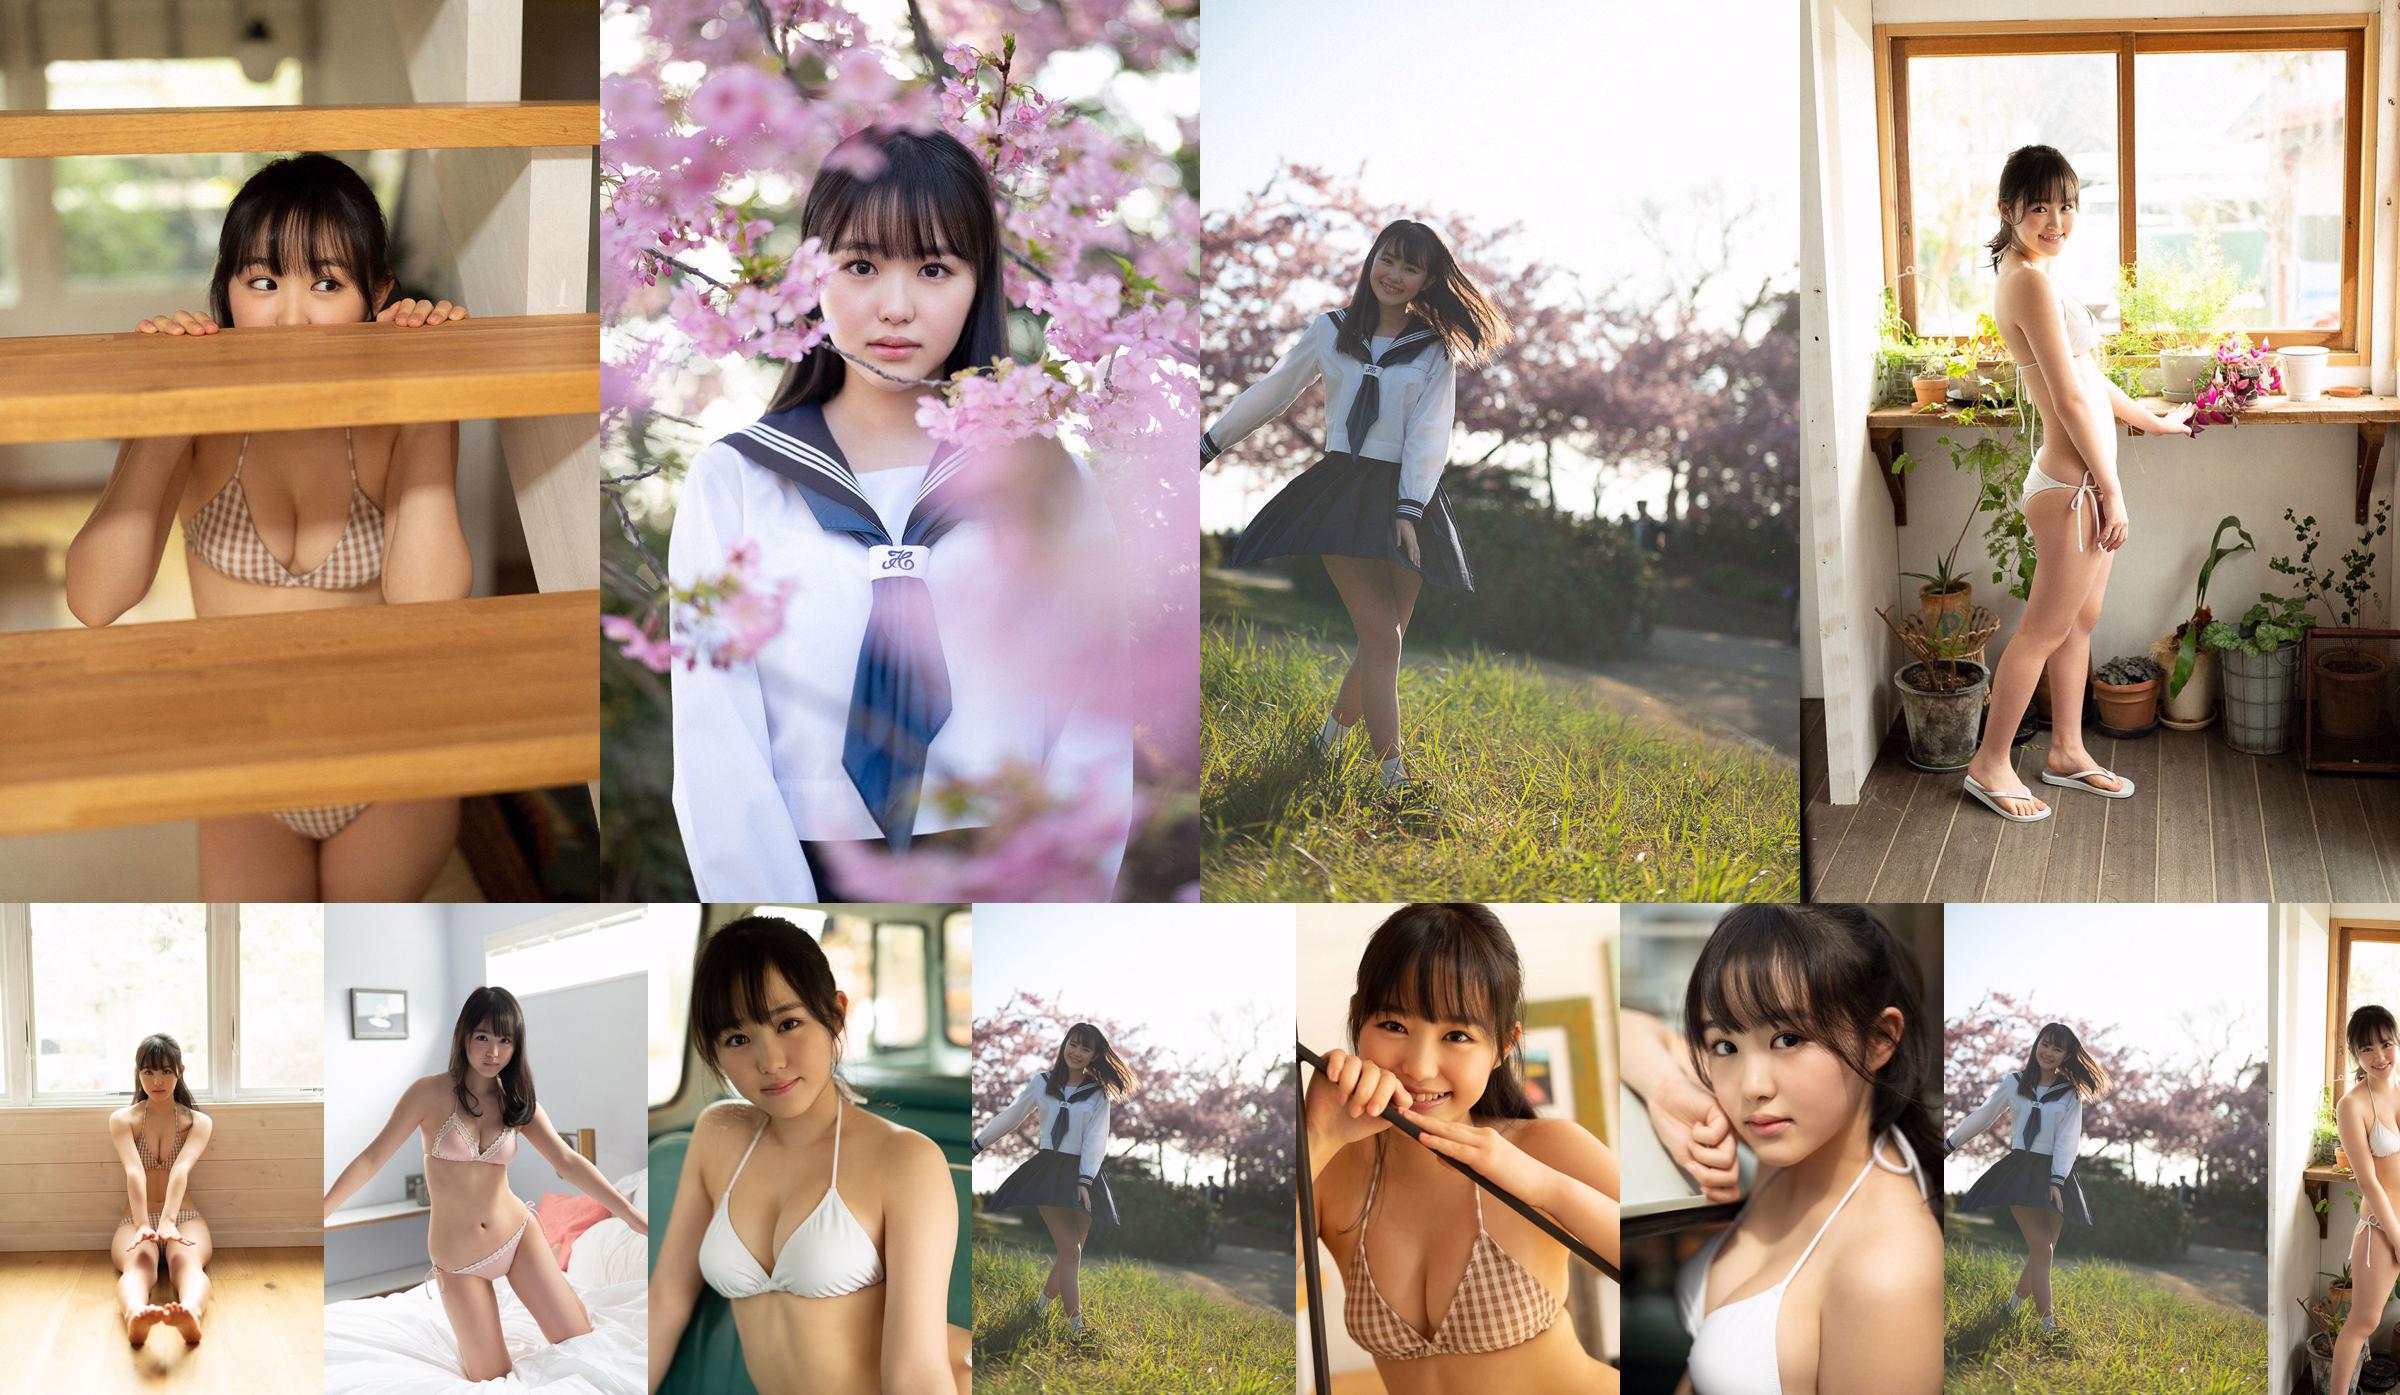 Koharu Ito "Come in Spring." [WPB-net] EXtra810 No.00d3a2 Page 7